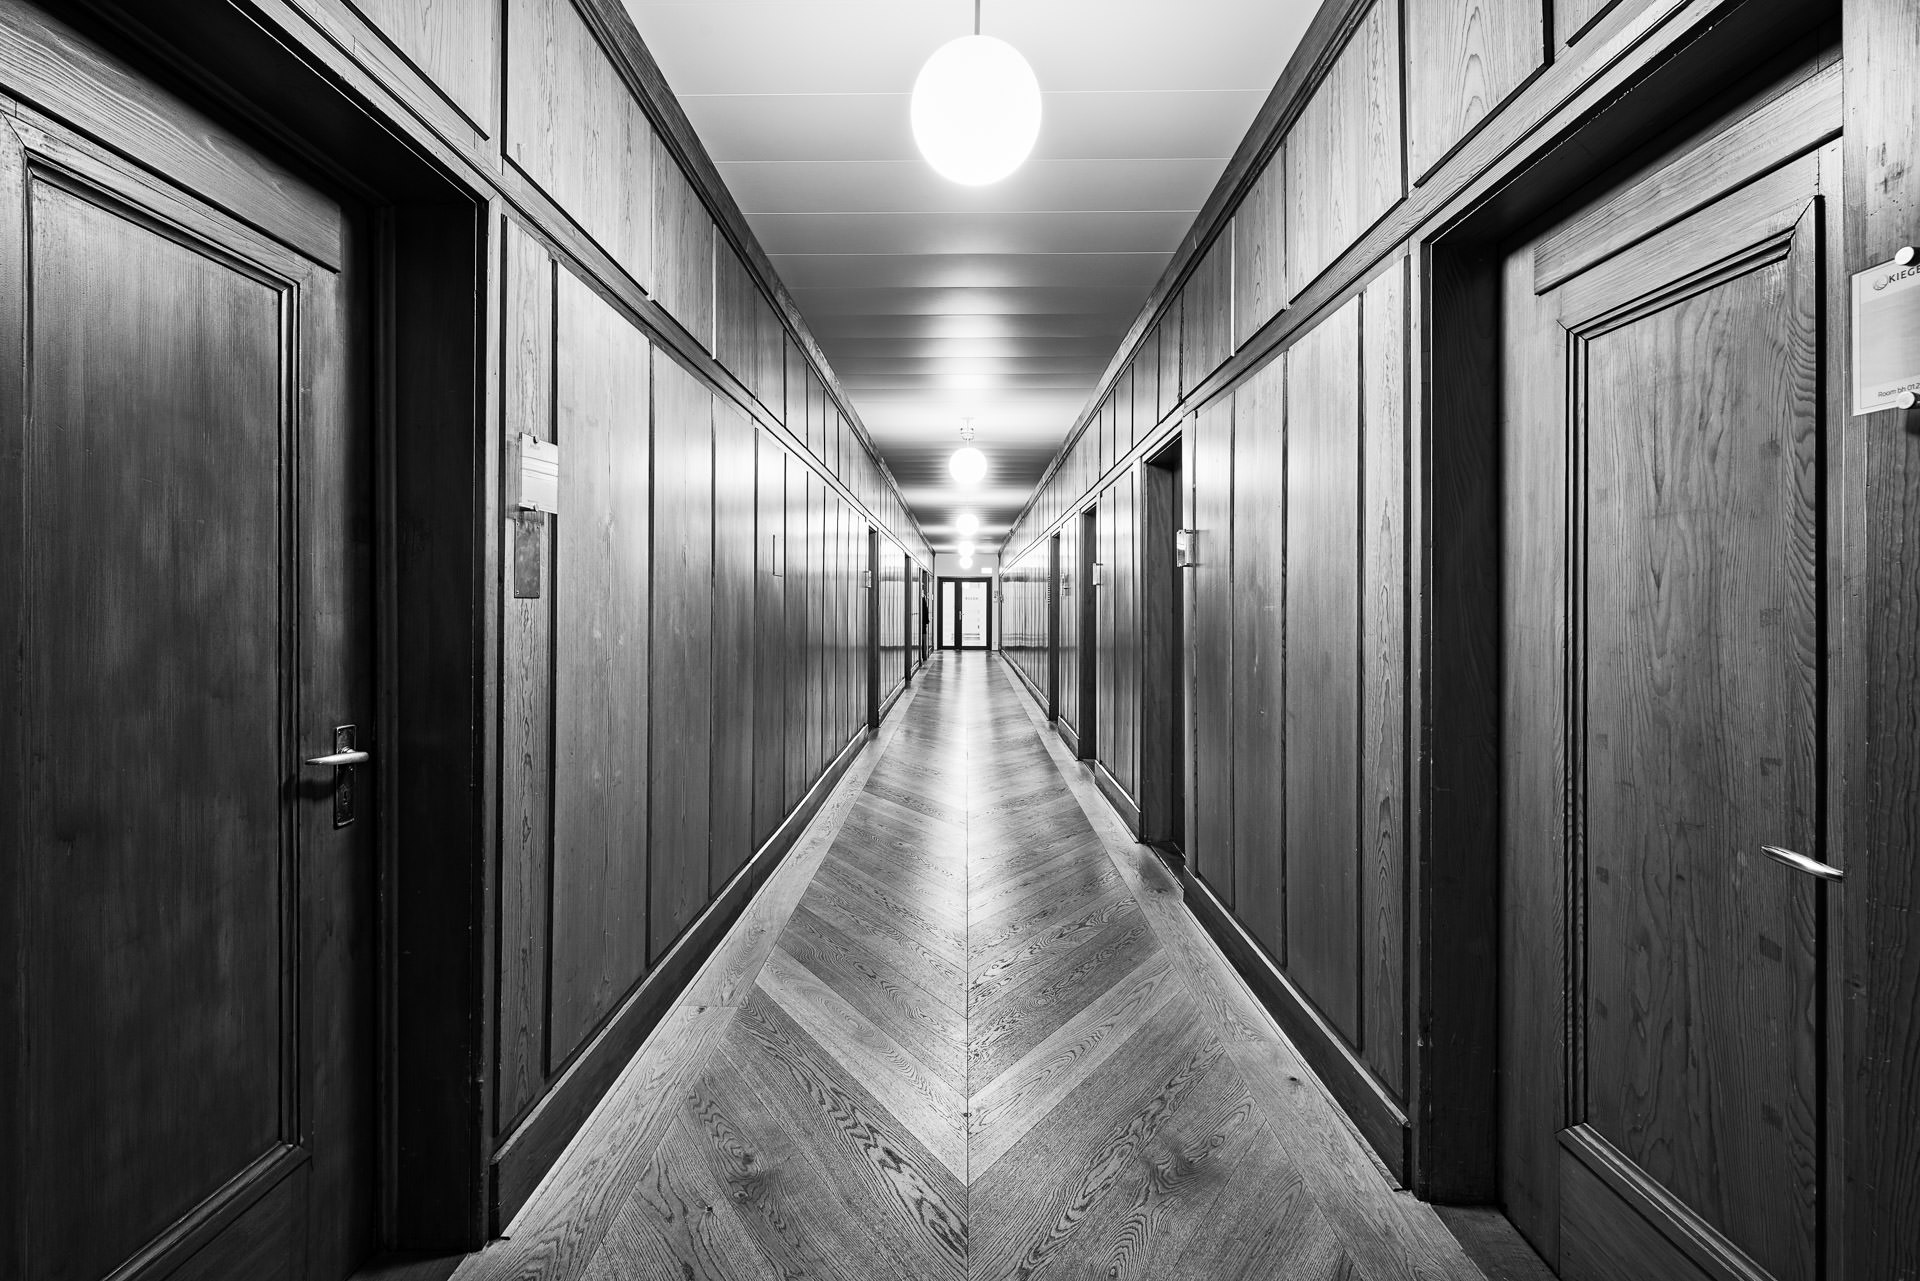 Long wooden hallway, Architectural Photography for Rebranding